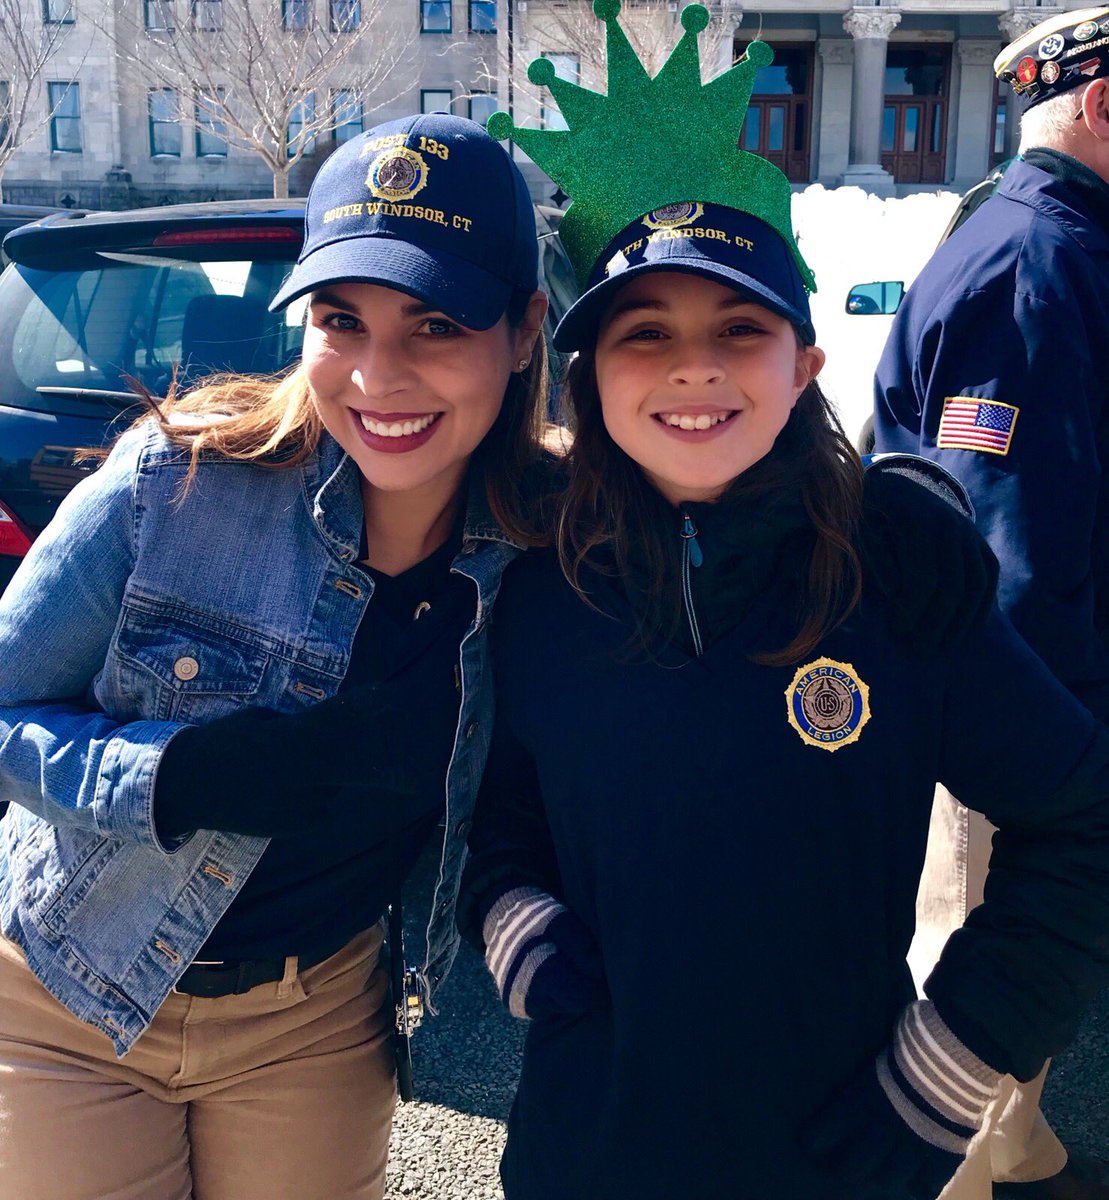 St. Patrick’s Day Parade with my extended family (American Legion Post 133)  #veterans4veterans #proudmember of #southwindsor #connecticut #americanlegion #happy #stpatricksday